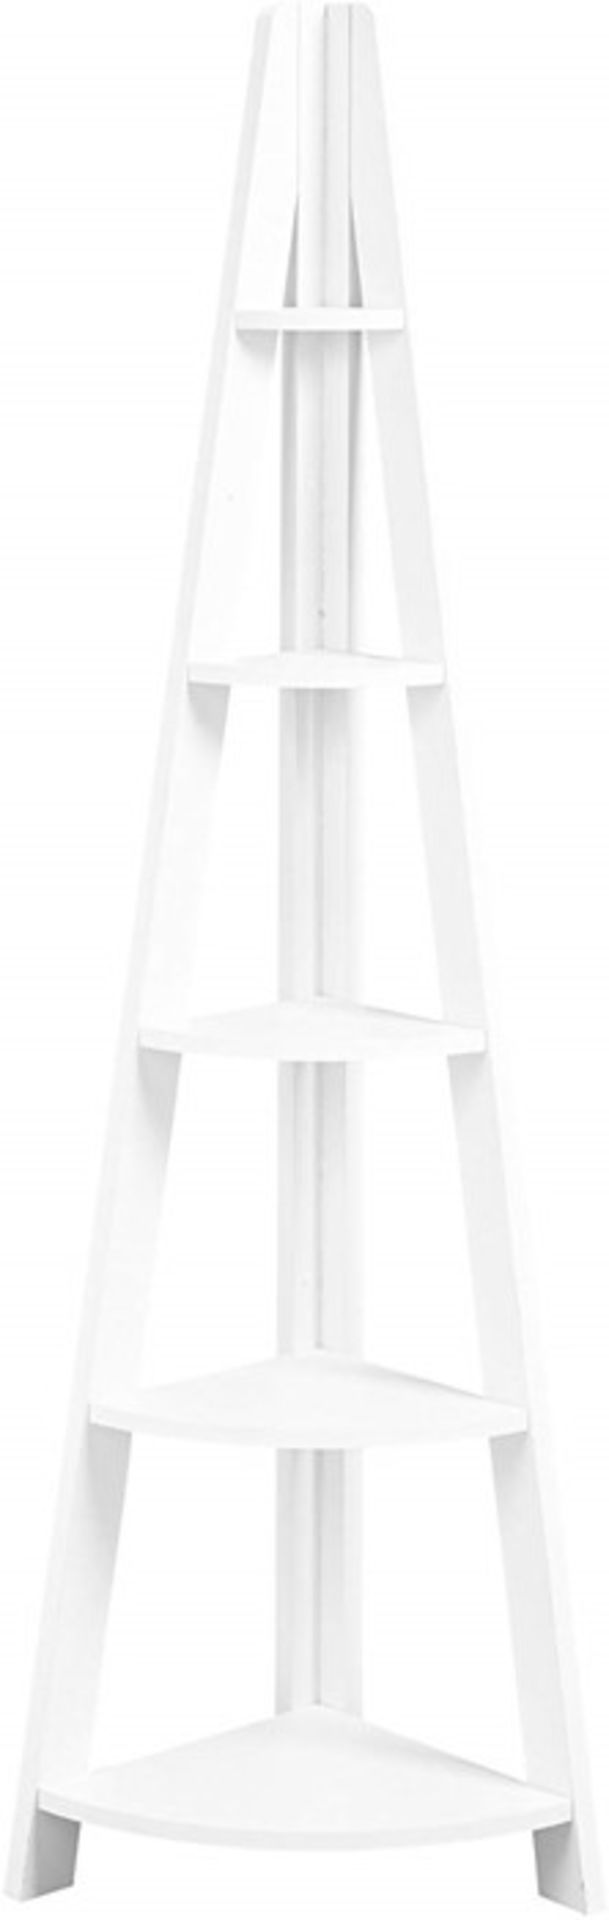 1 BOXED TIVA CORNER LADDER SHELVING IN WHITE - TIVAWHICOR / RRP £82.99 (PUBLIC VIEWING AVAILABLE)